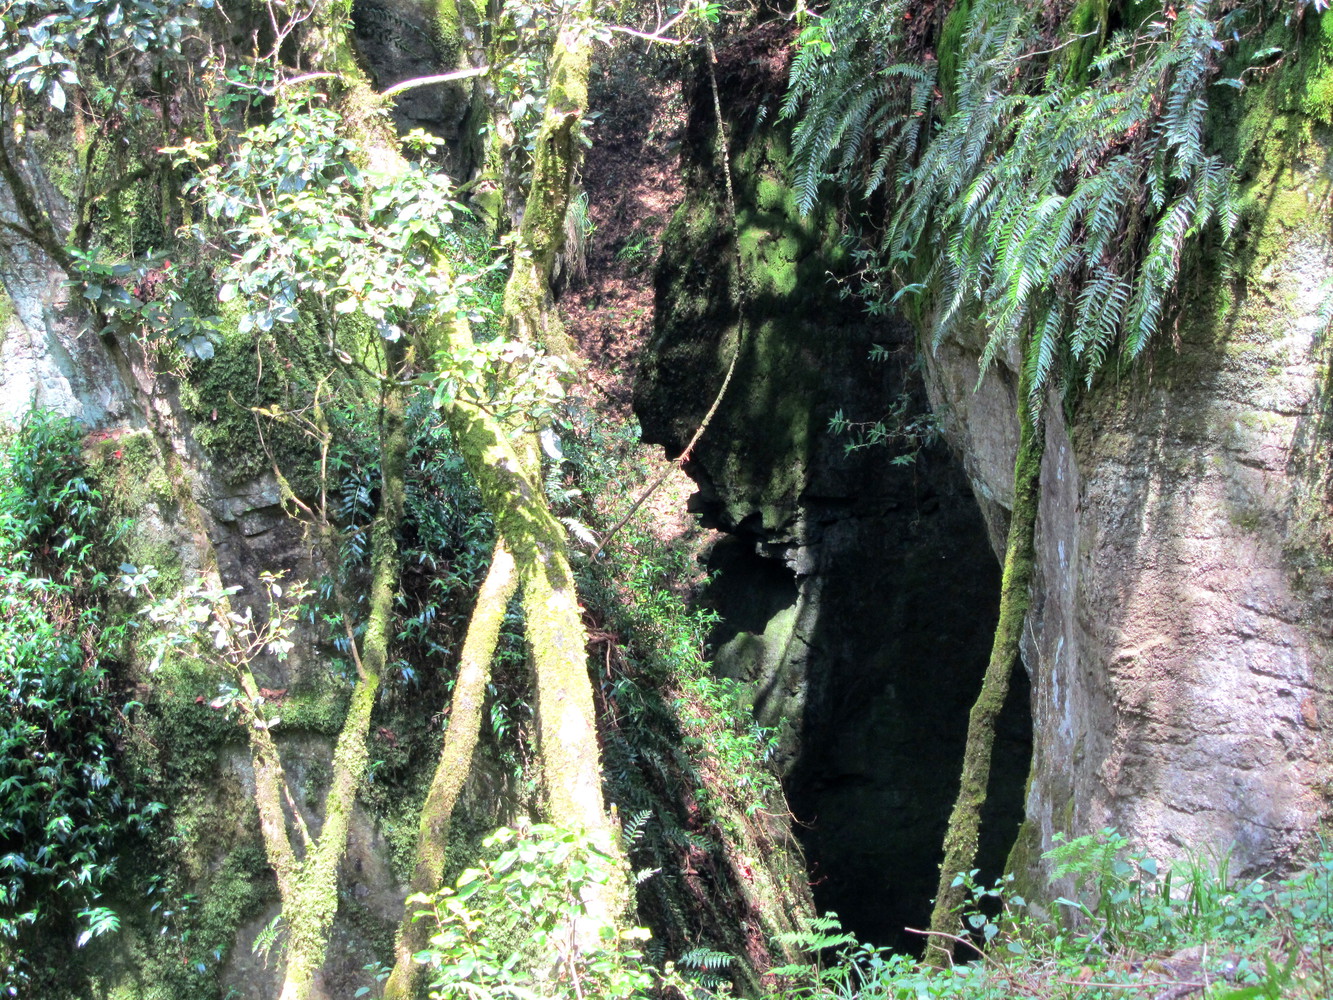 A cave below surrounded by trees